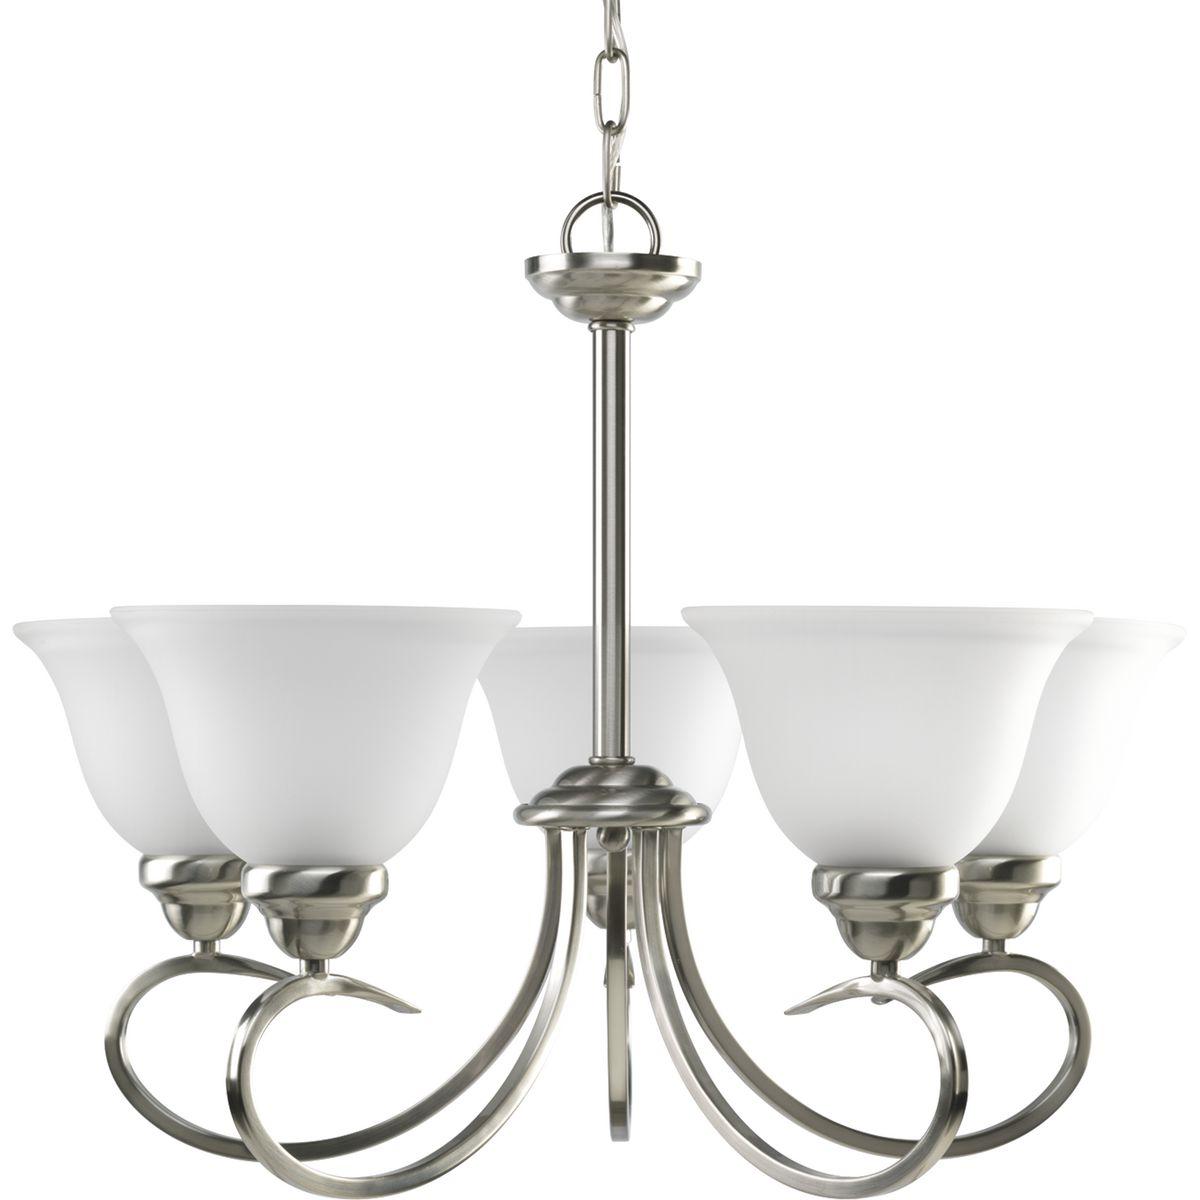 Hubbell HS41005-09 Featuring delicate scrolled metalwork and soft details, this casual five-light chandelier is perfect for many interiors. Slightly tapered etched glass shades are completed by a Brushed Nickel finish. This fixture is hung with the shades facing upwards onl